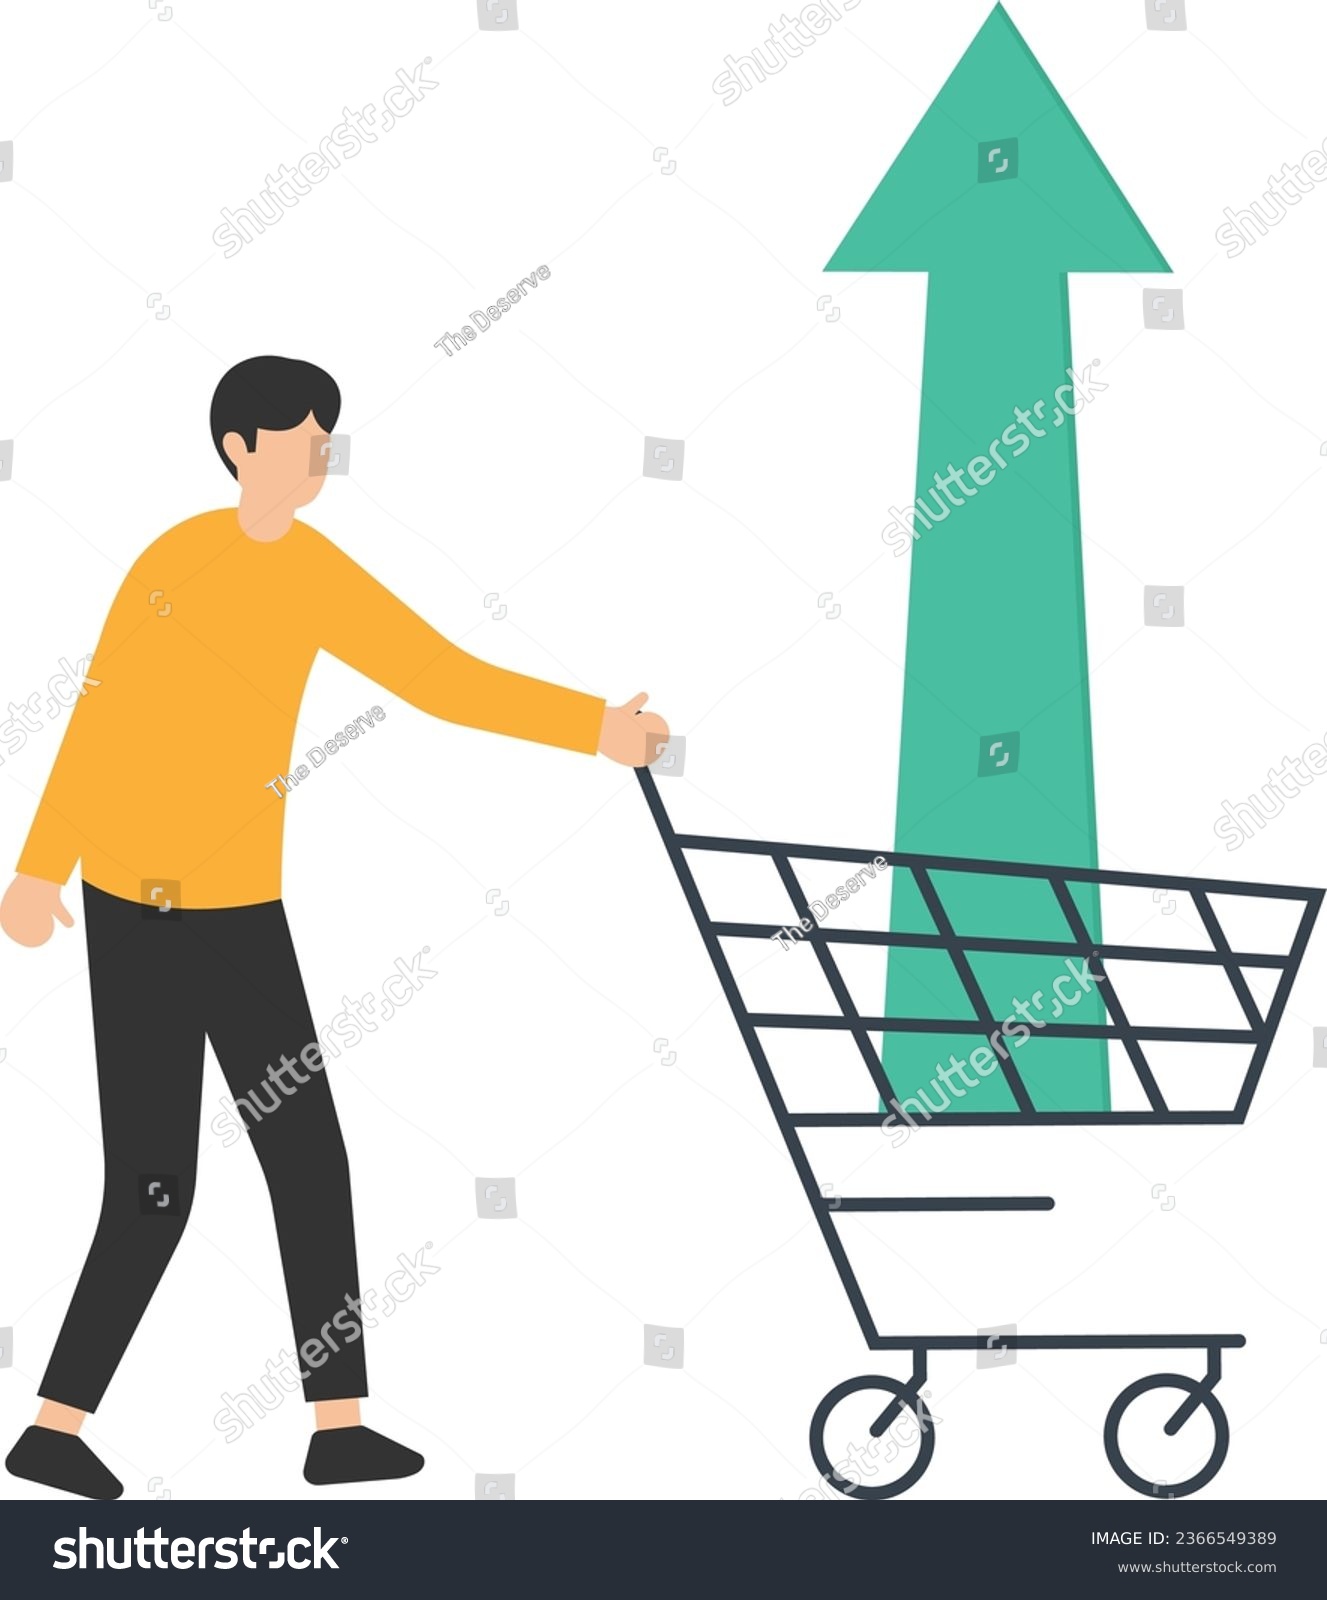 SVG of Buy on the dip, purchase stock when price drop, Trader signal to invest, Make profit from market collapse, Buy stock with down arrow graph in shopping cart

 svg